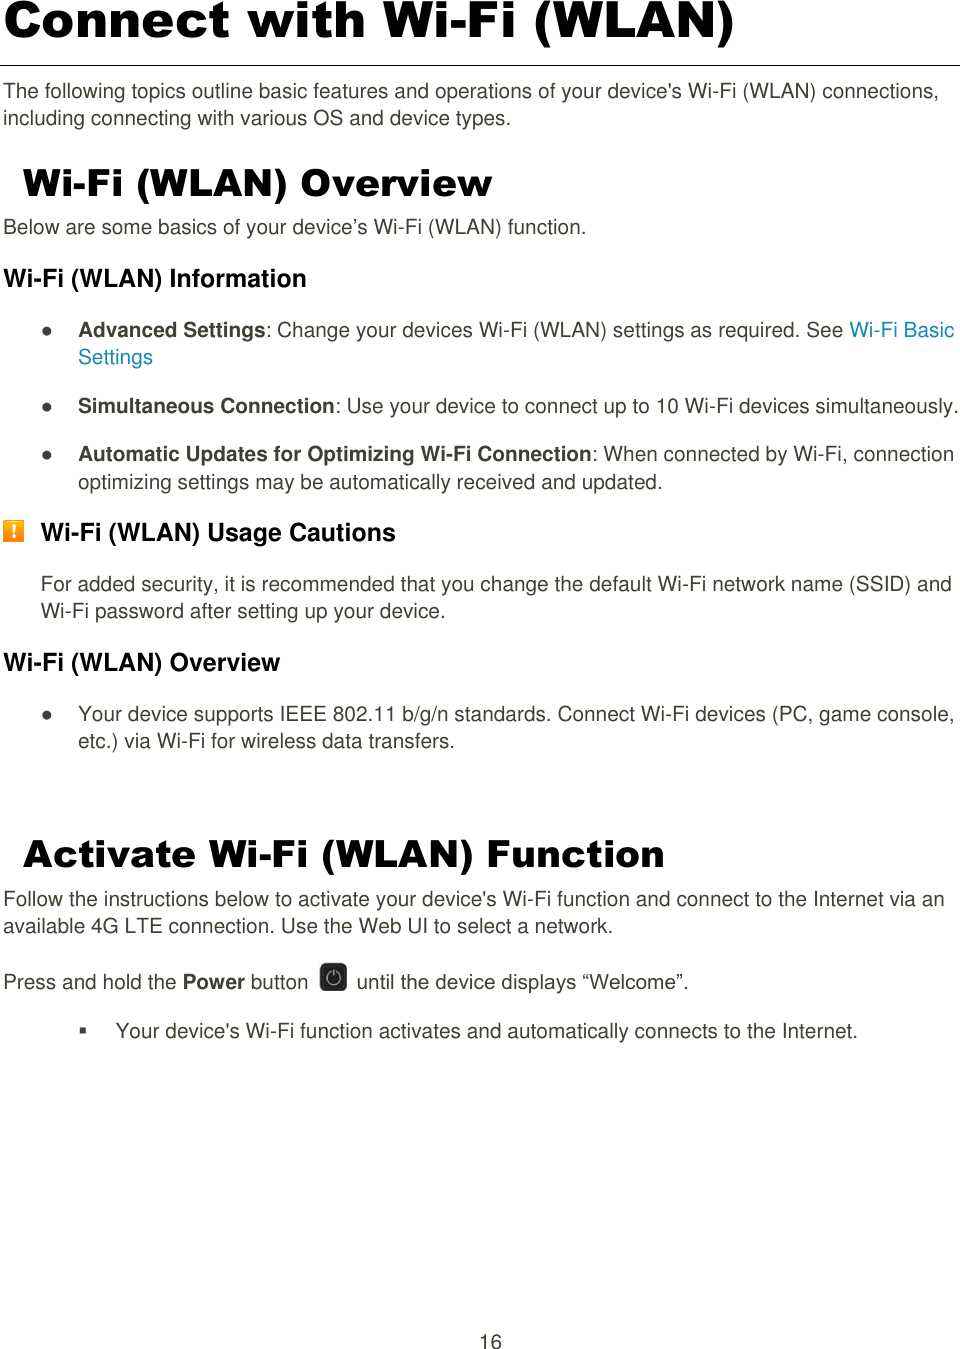 16  Connect with Wi-Fi (WLAN) The following topics outline basic features and operations of your device&apos;s Wi-Fi (WLAN) connections, including connecting with various OS and device types. Wi-Fi (WLAN) Overview Below are some basics of your device’s Wi-Fi (WLAN) function. Wi-Fi (WLAN) Information ● Advanced Settings: Change your devices Wi-Fi (WLAN) settings as required. See Wi-Fi Basic Settings ● Simultaneous Connection: Use your device to connect up to 10 Wi-Fi devices simultaneously.   ● Automatic Updates for Optimizing Wi-Fi Connection: When connected by Wi-Fi, connection optimizing settings may be automatically received and updated.  Wi-Fi (WLAN) Usage Cautions For added security, it is recommended that you change the default Wi-Fi network name (SSID) and Wi-Fi password after setting up your device. Wi-Fi (WLAN) Overview   ●  Your device supports IEEE 802.11 b/g/n standards. Connect Wi-Fi devices (PC, game console, etc.) via Wi-Fi for wireless data transfers.  Activate Wi-Fi (WLAN) Function Follow the instructions below to activate your device&apos;s Wi-Fi function and connect to the Internet via an available 4G LTE connection. Use the Web UI to select a network. Press and hold the Power button    until the device displays “Welcome”.   Your device&apos;s Wi-Fi function activates and automatically connects to the Internet.    